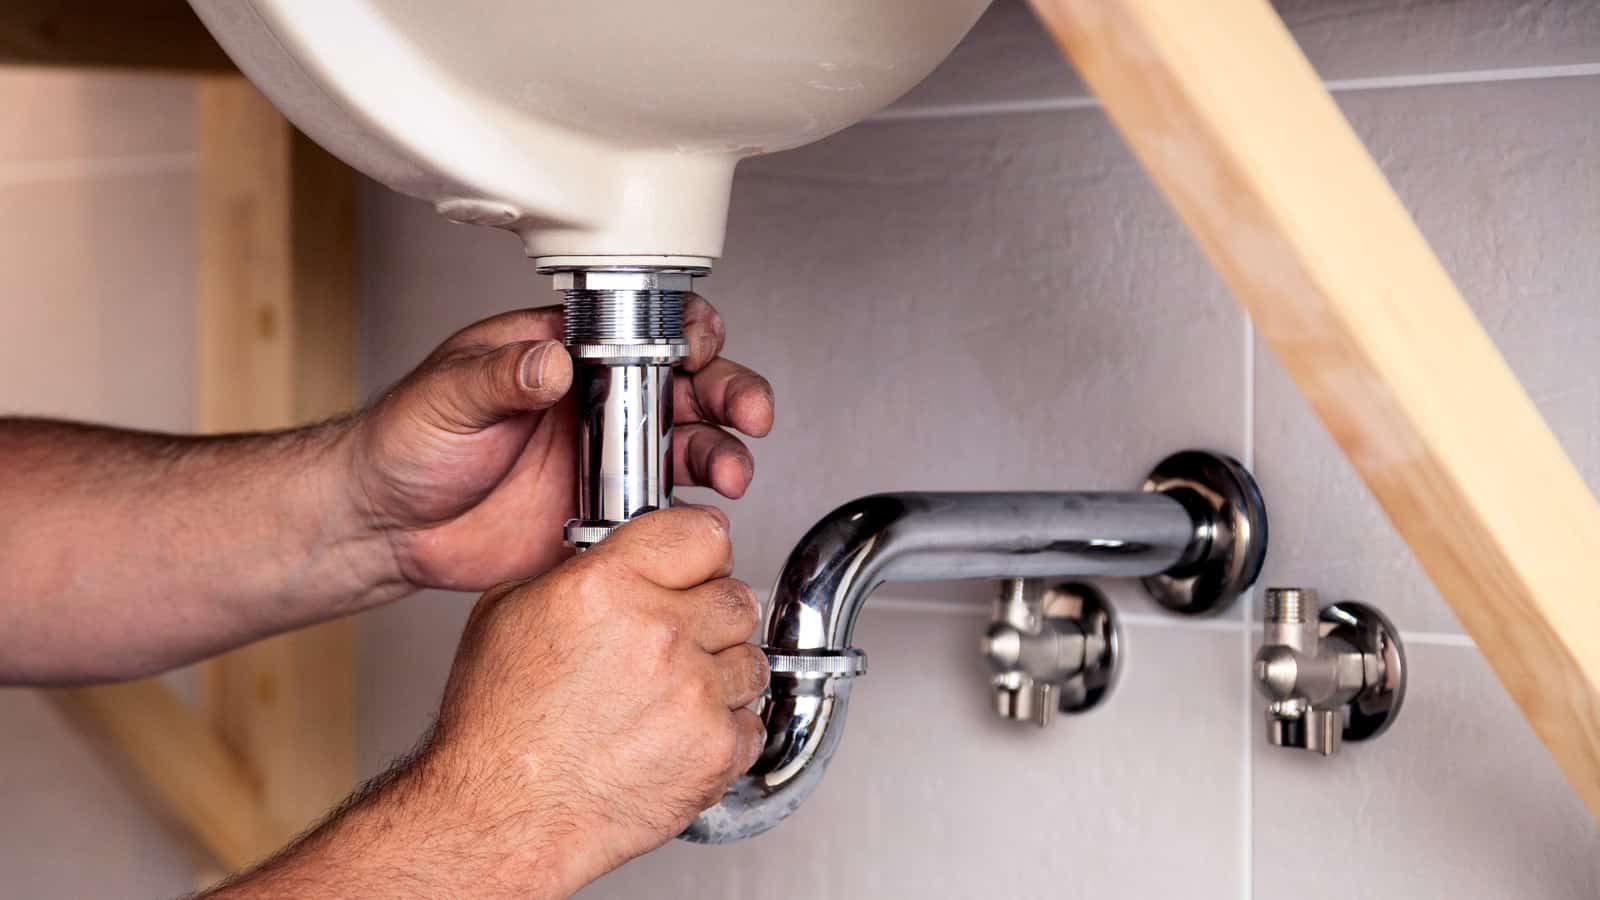 Roto Rooter Plumbing And Water Cleanup of Helotes